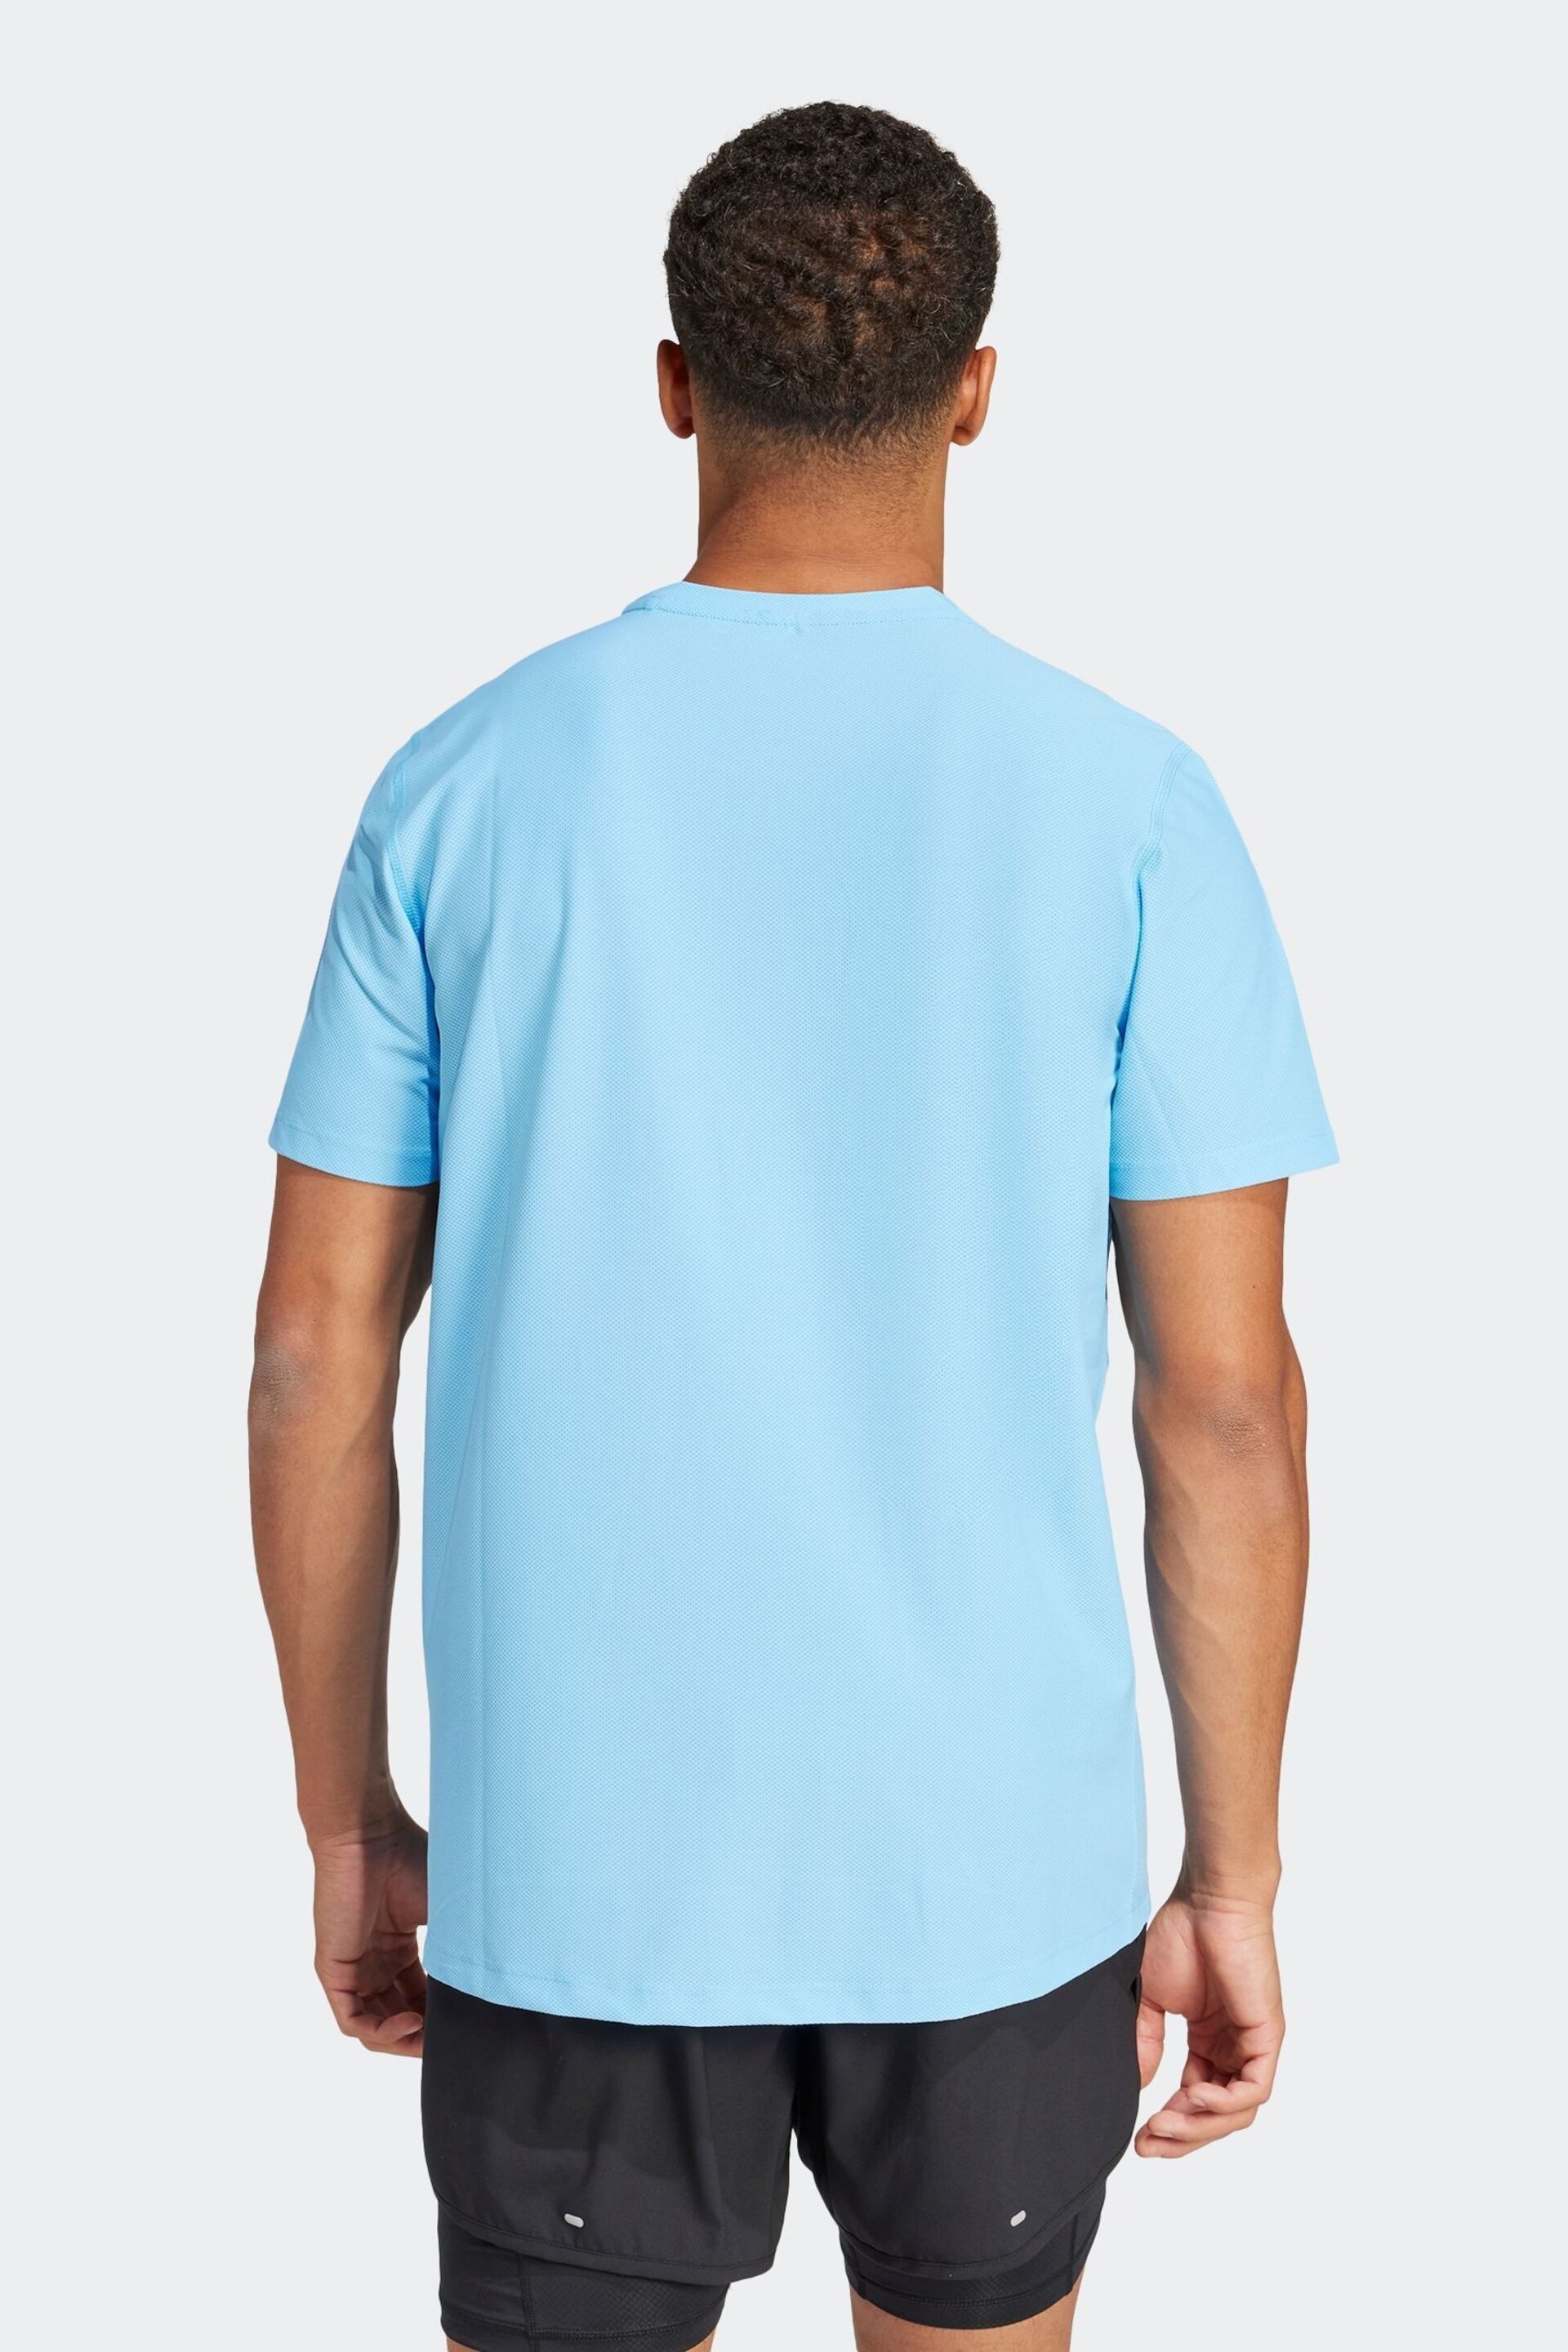 adidas Blue Own The Run T-Shirt - Image 2 of 6